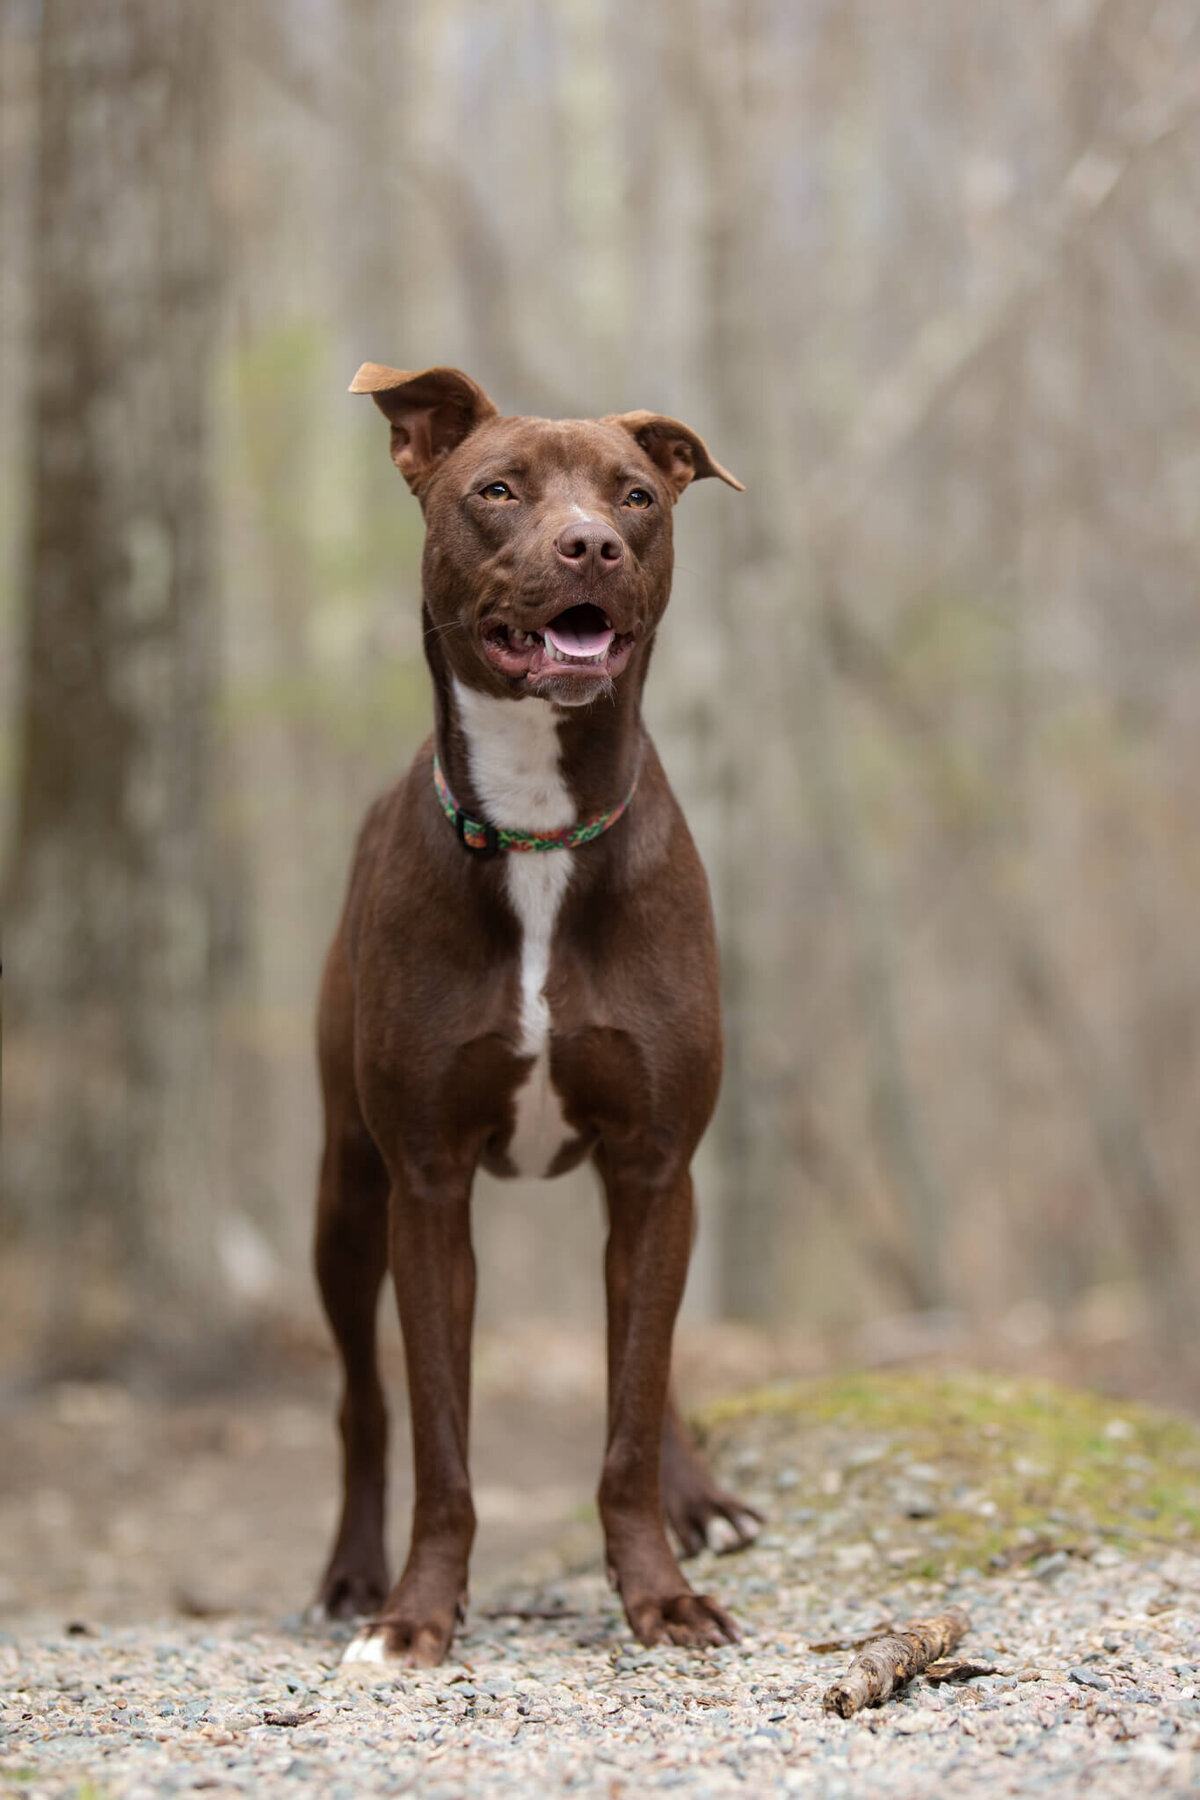 Dark brown rescue dog with white markings smiling on a gravel path